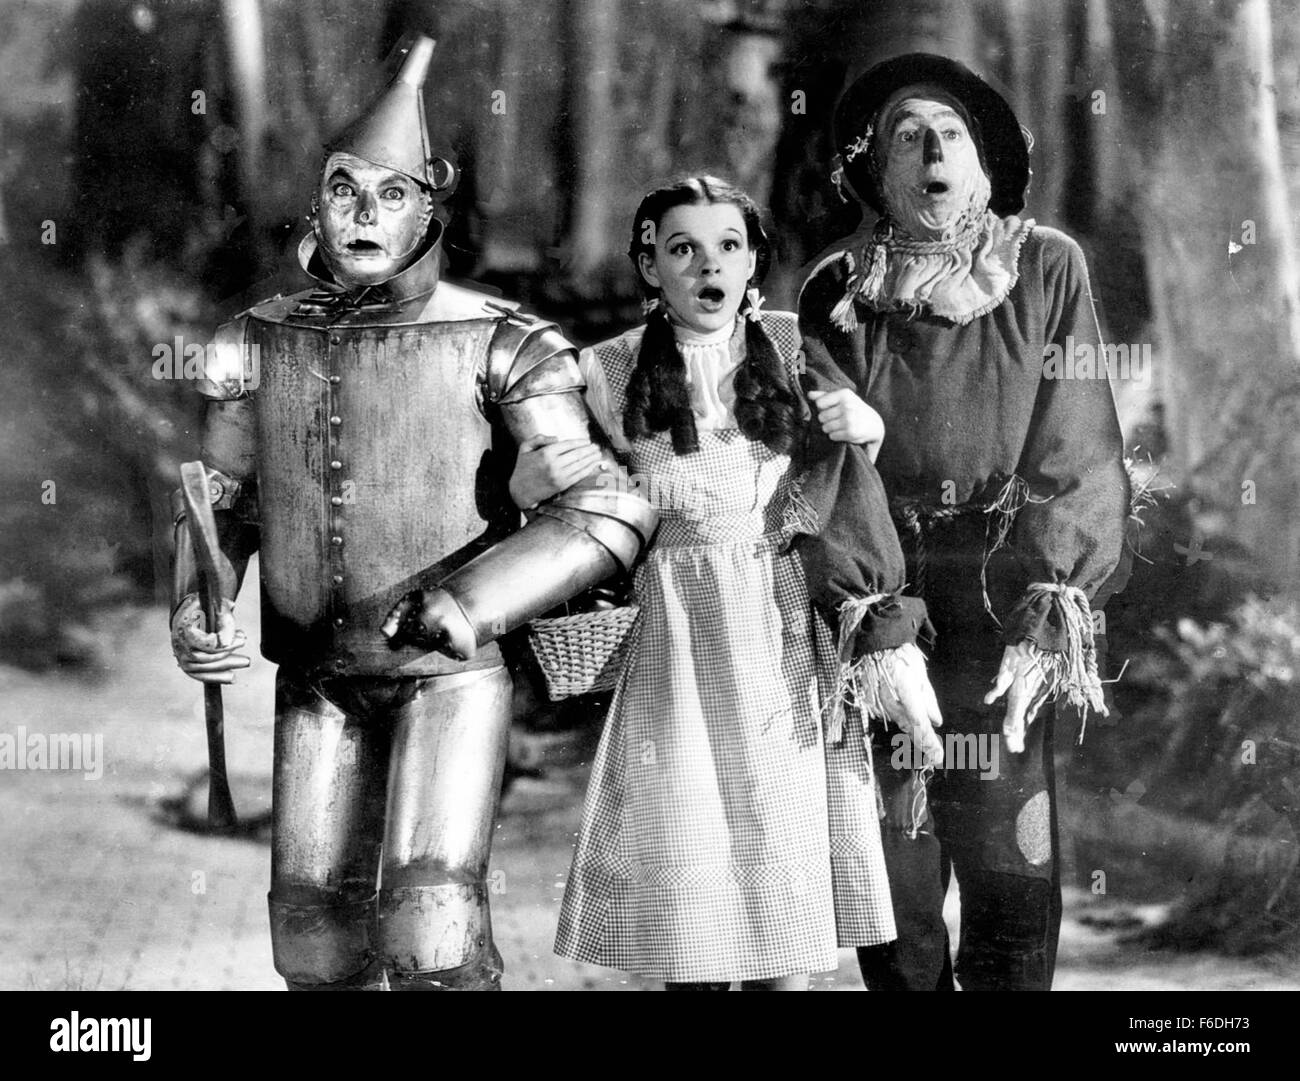 RELEASED:  Aug 12, 1939 - Original Film Title: The Wizard of Oz. PICTURED: JACK HALEY, JUDY GARLAND,  RAY BOLGER. Stock Photo